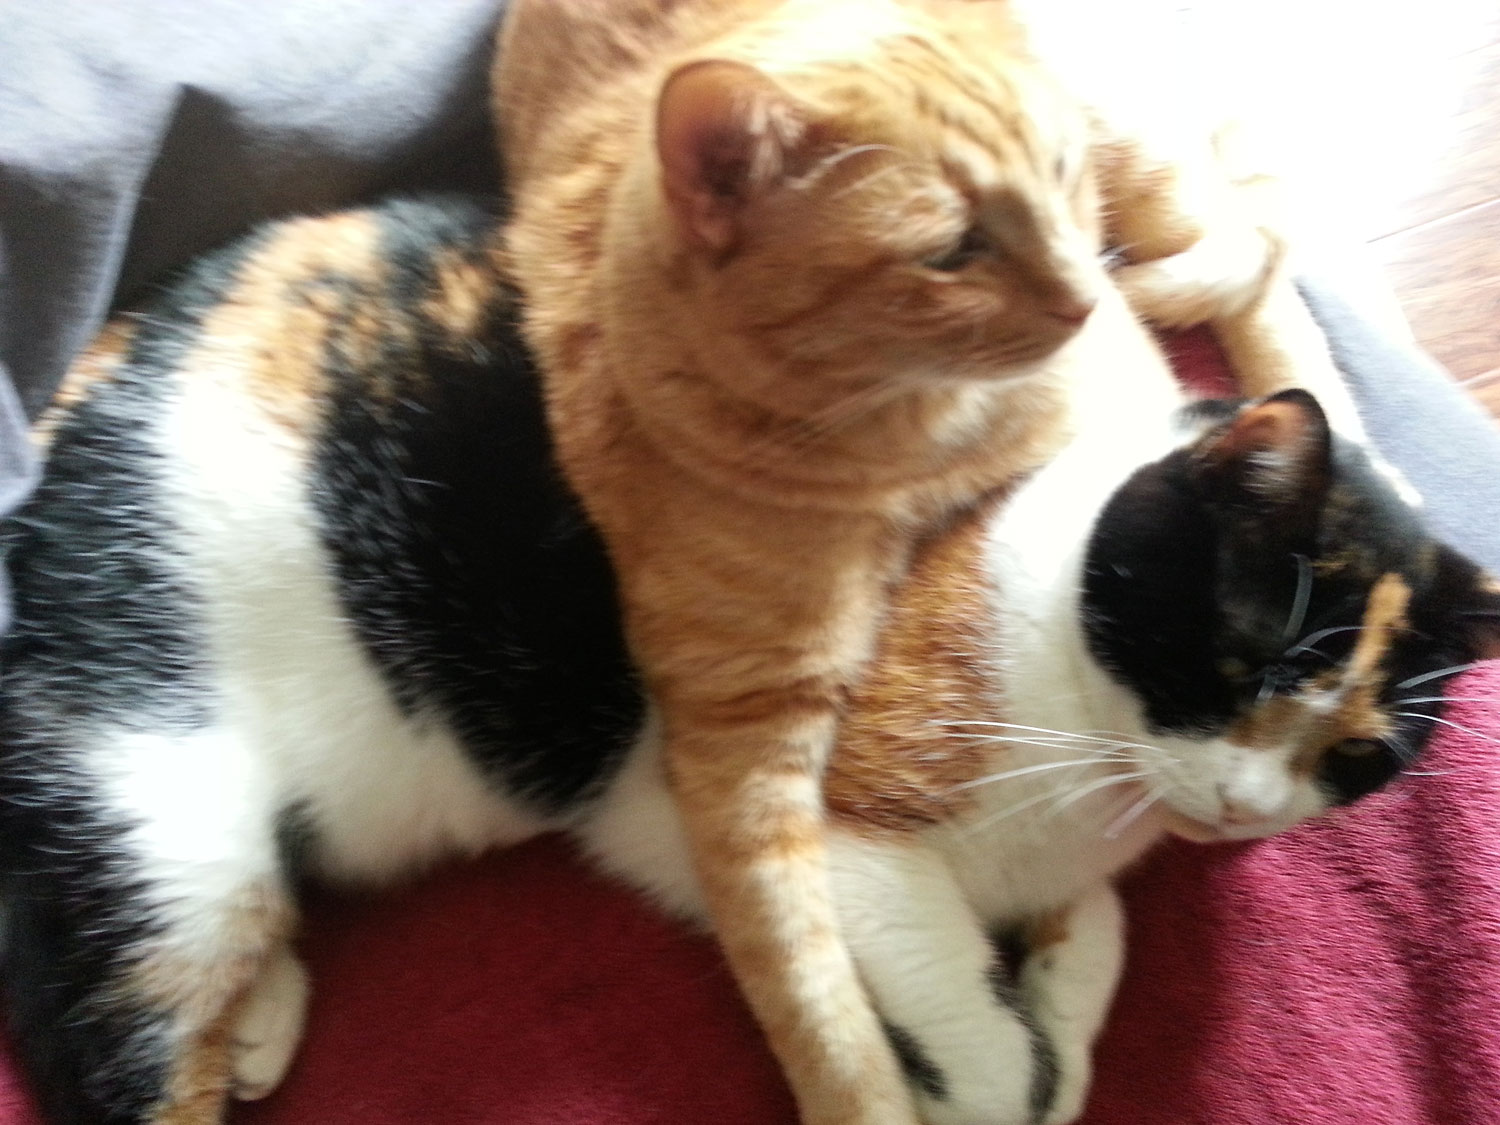 Gary P. in Laguna Hills, CA sent a picture of his cats Max and Coco, relaxing, on top of each other? 